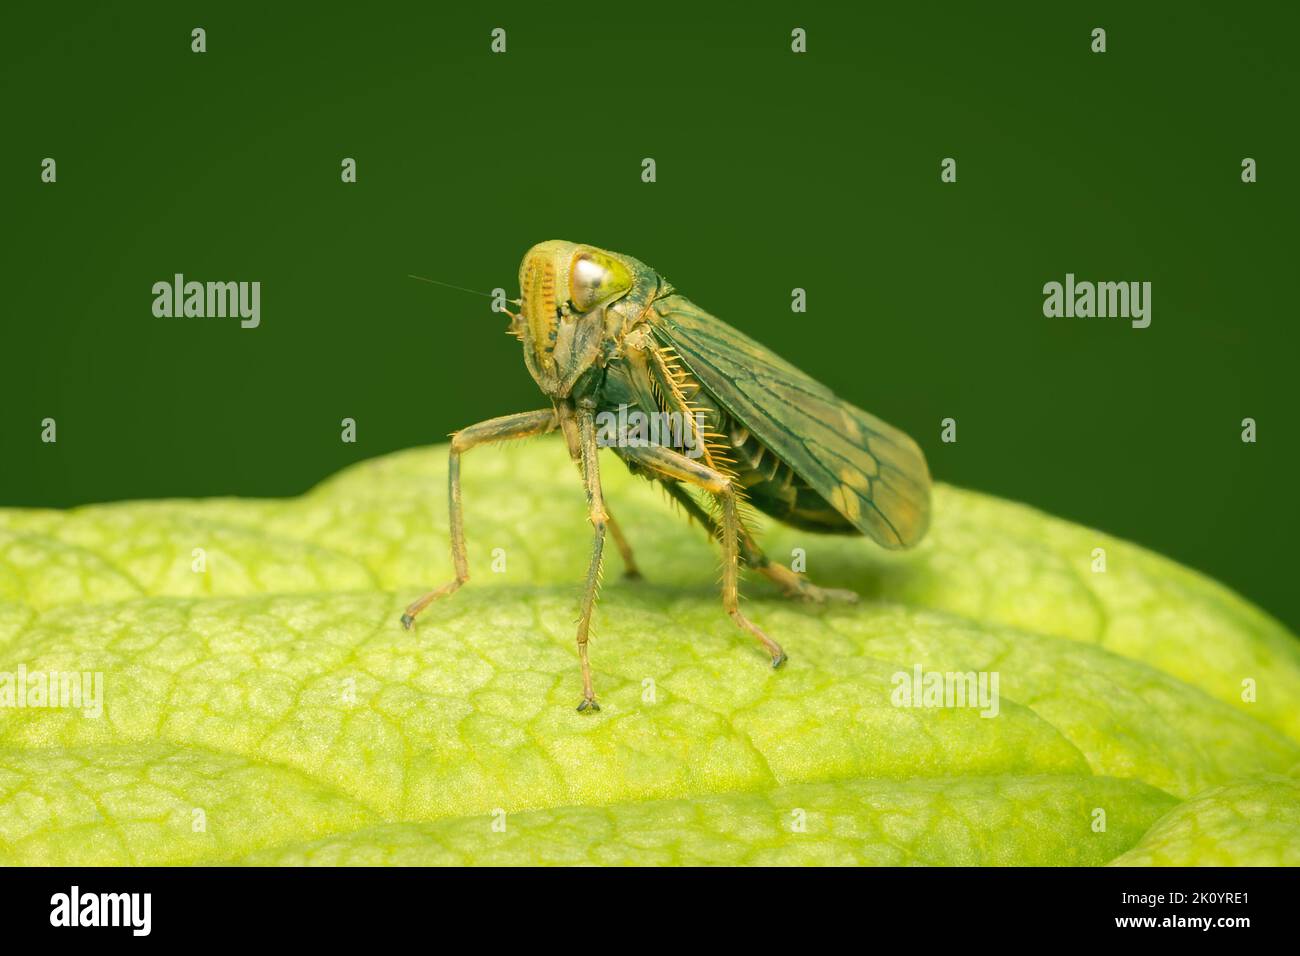 Small leafhopper resting on a green leaf with copy space Stock Photo